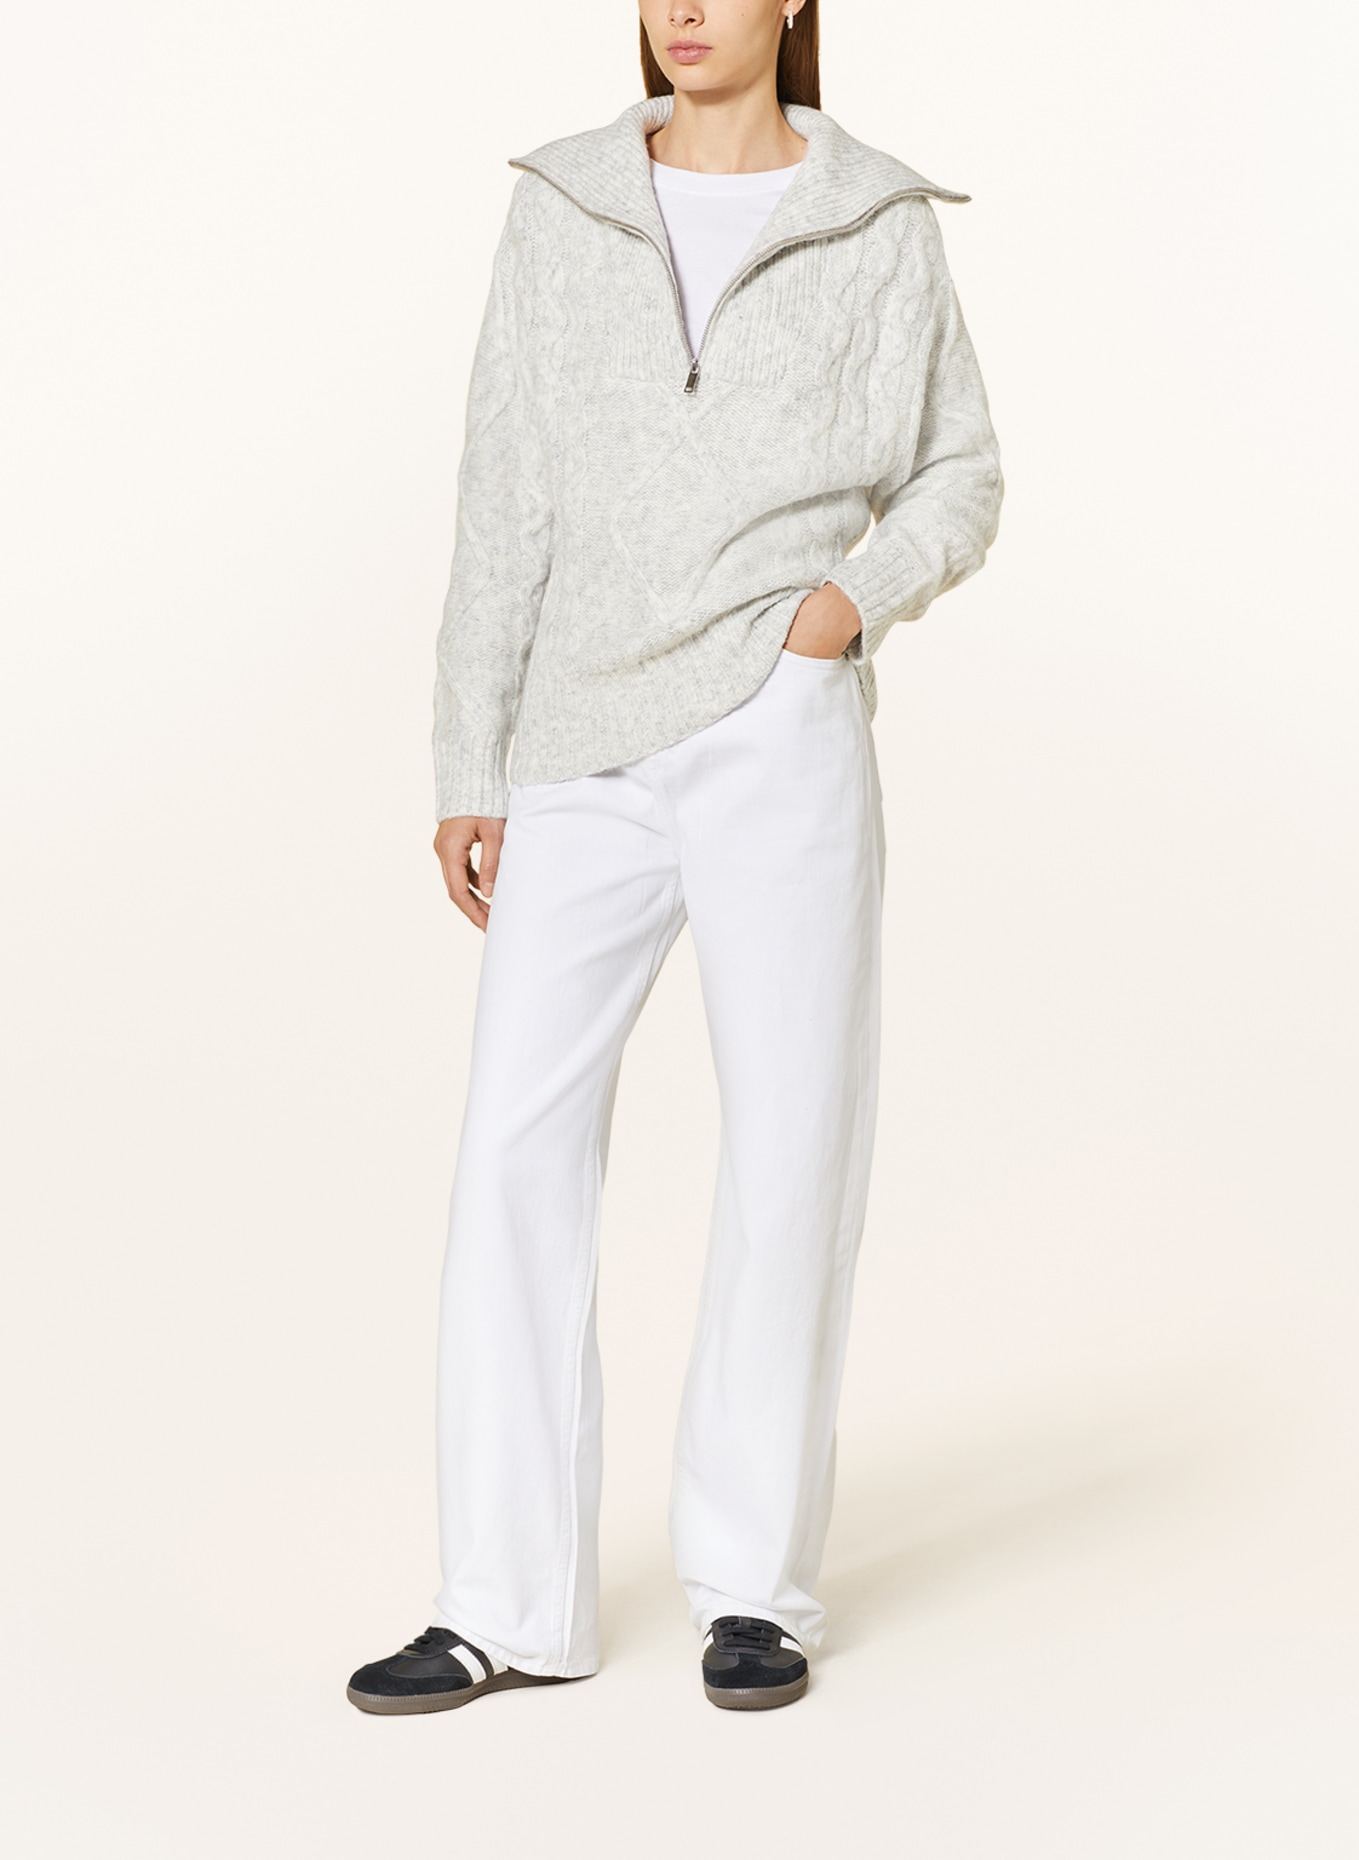 gina tricot Half-zip sweater, Color: LIGHT GRAY (Image 2)